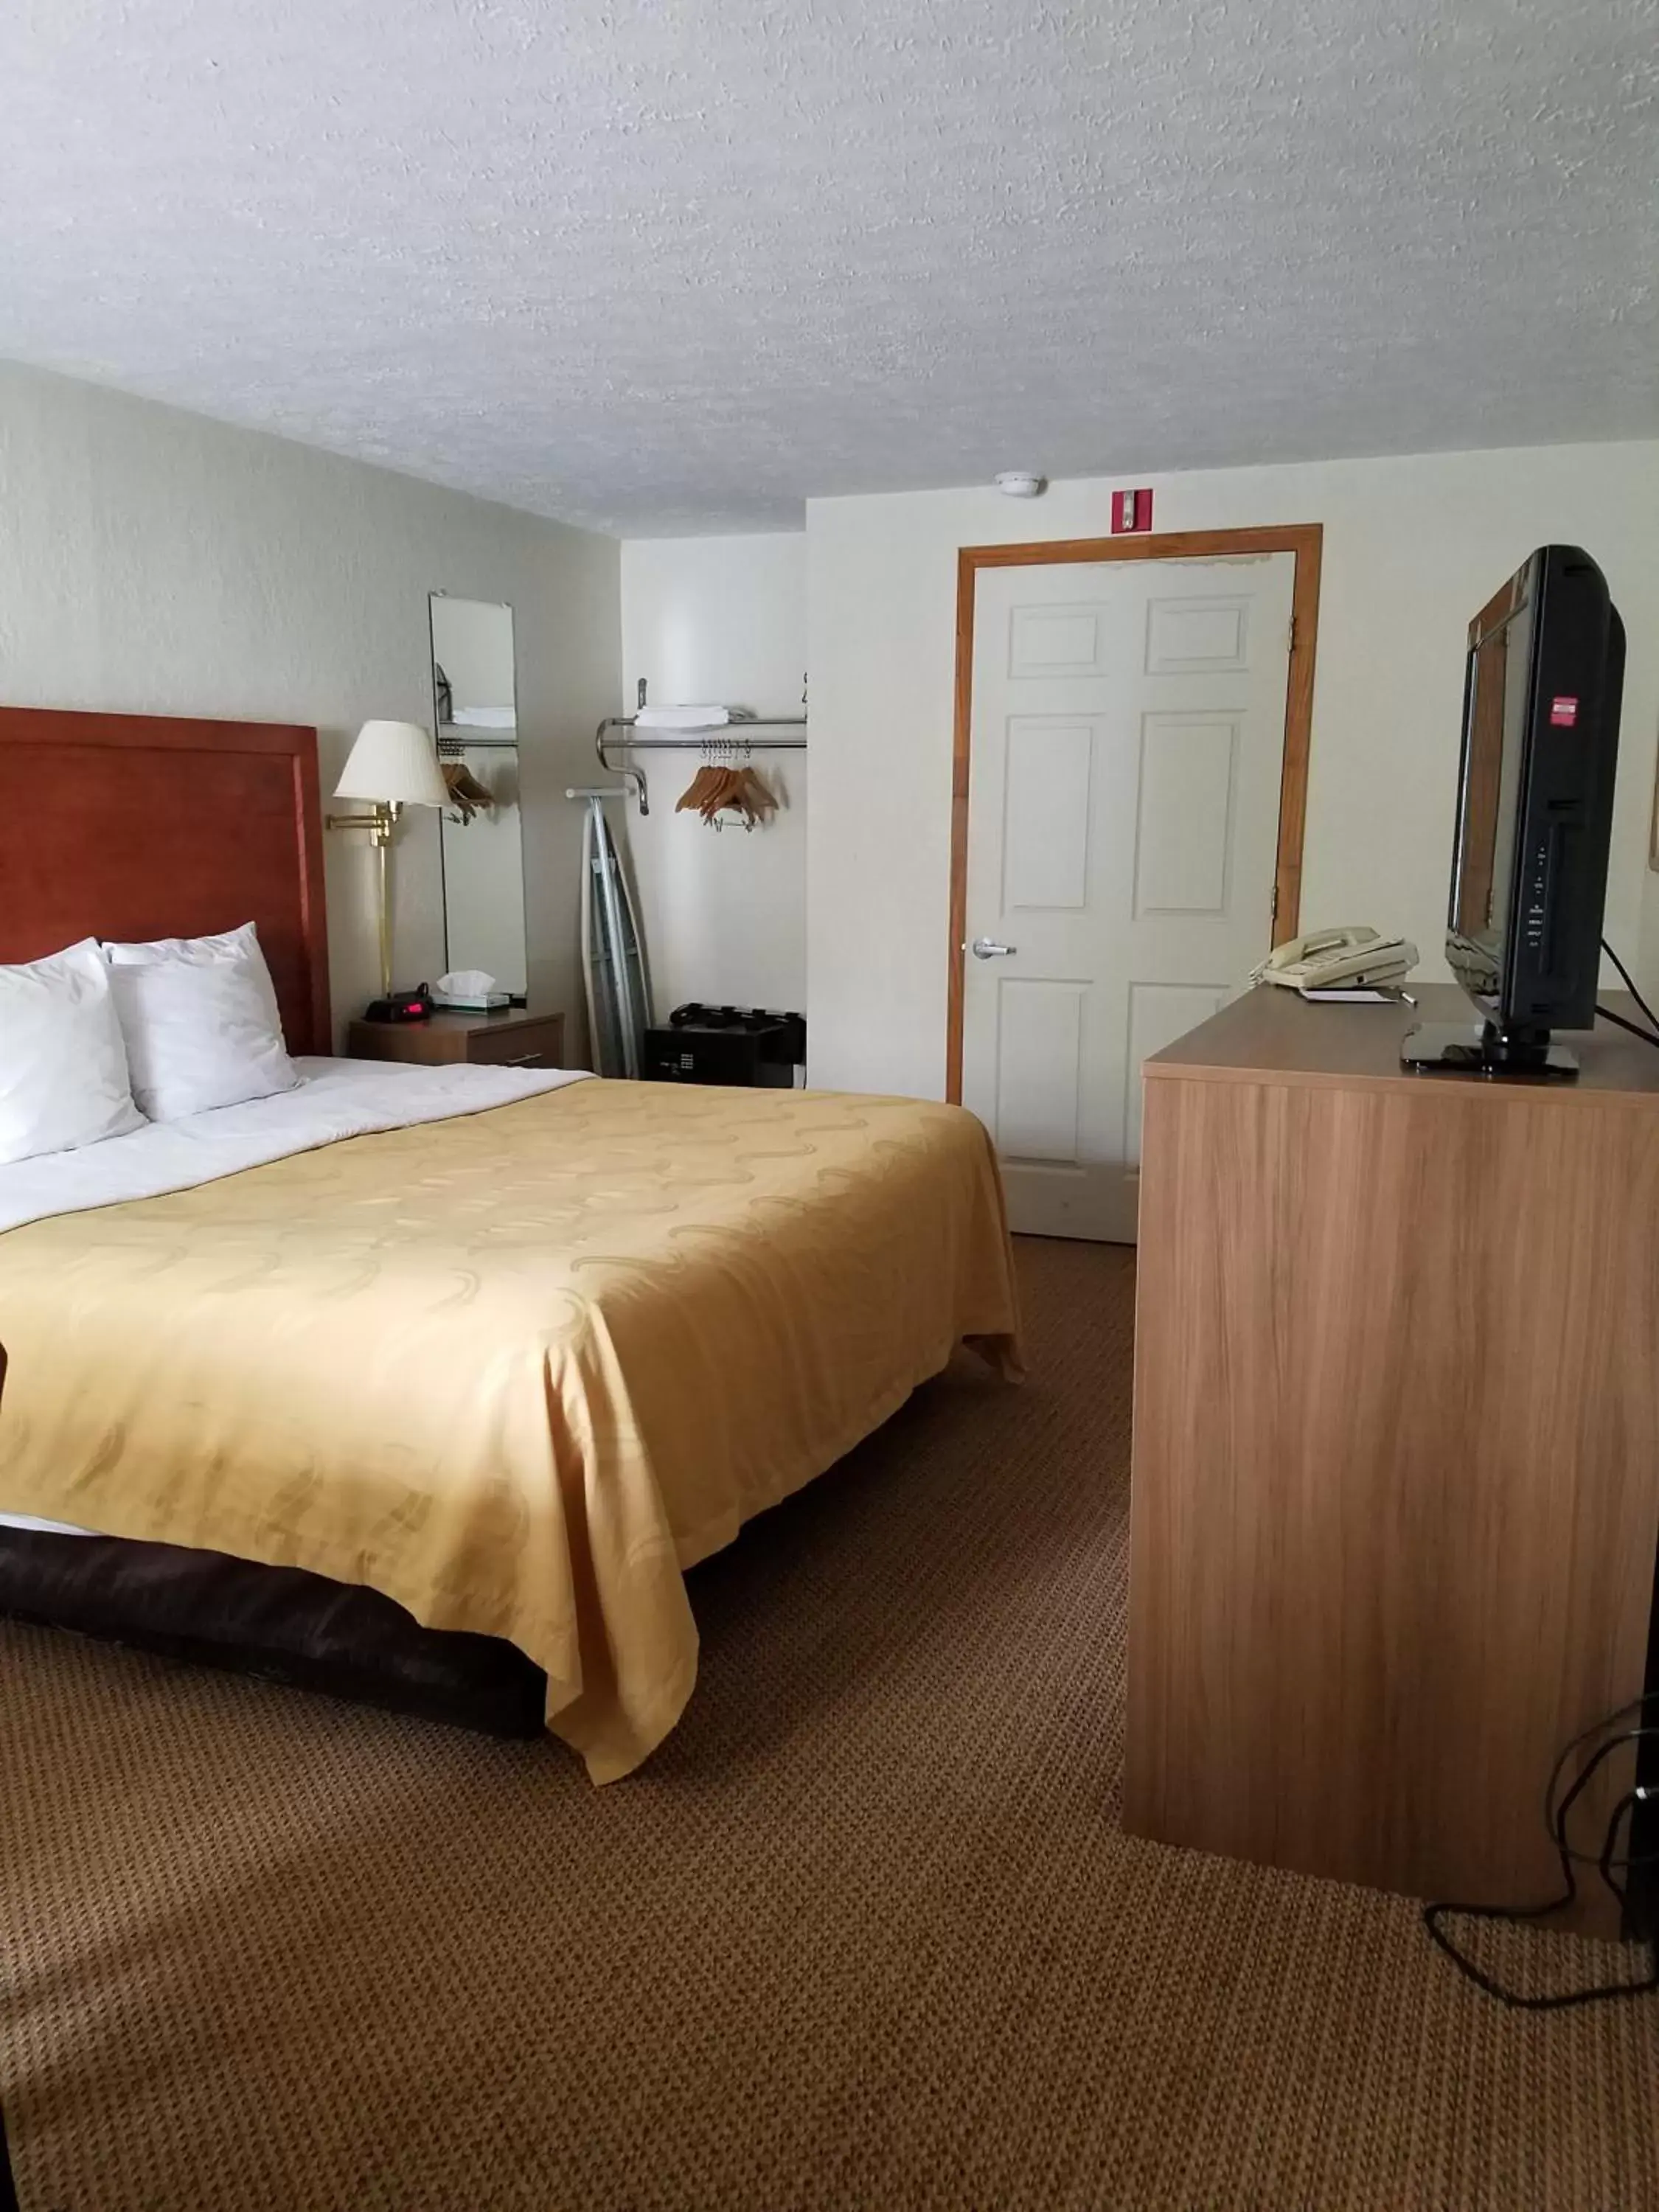 Bedroom in Quality Inn New River Gorge